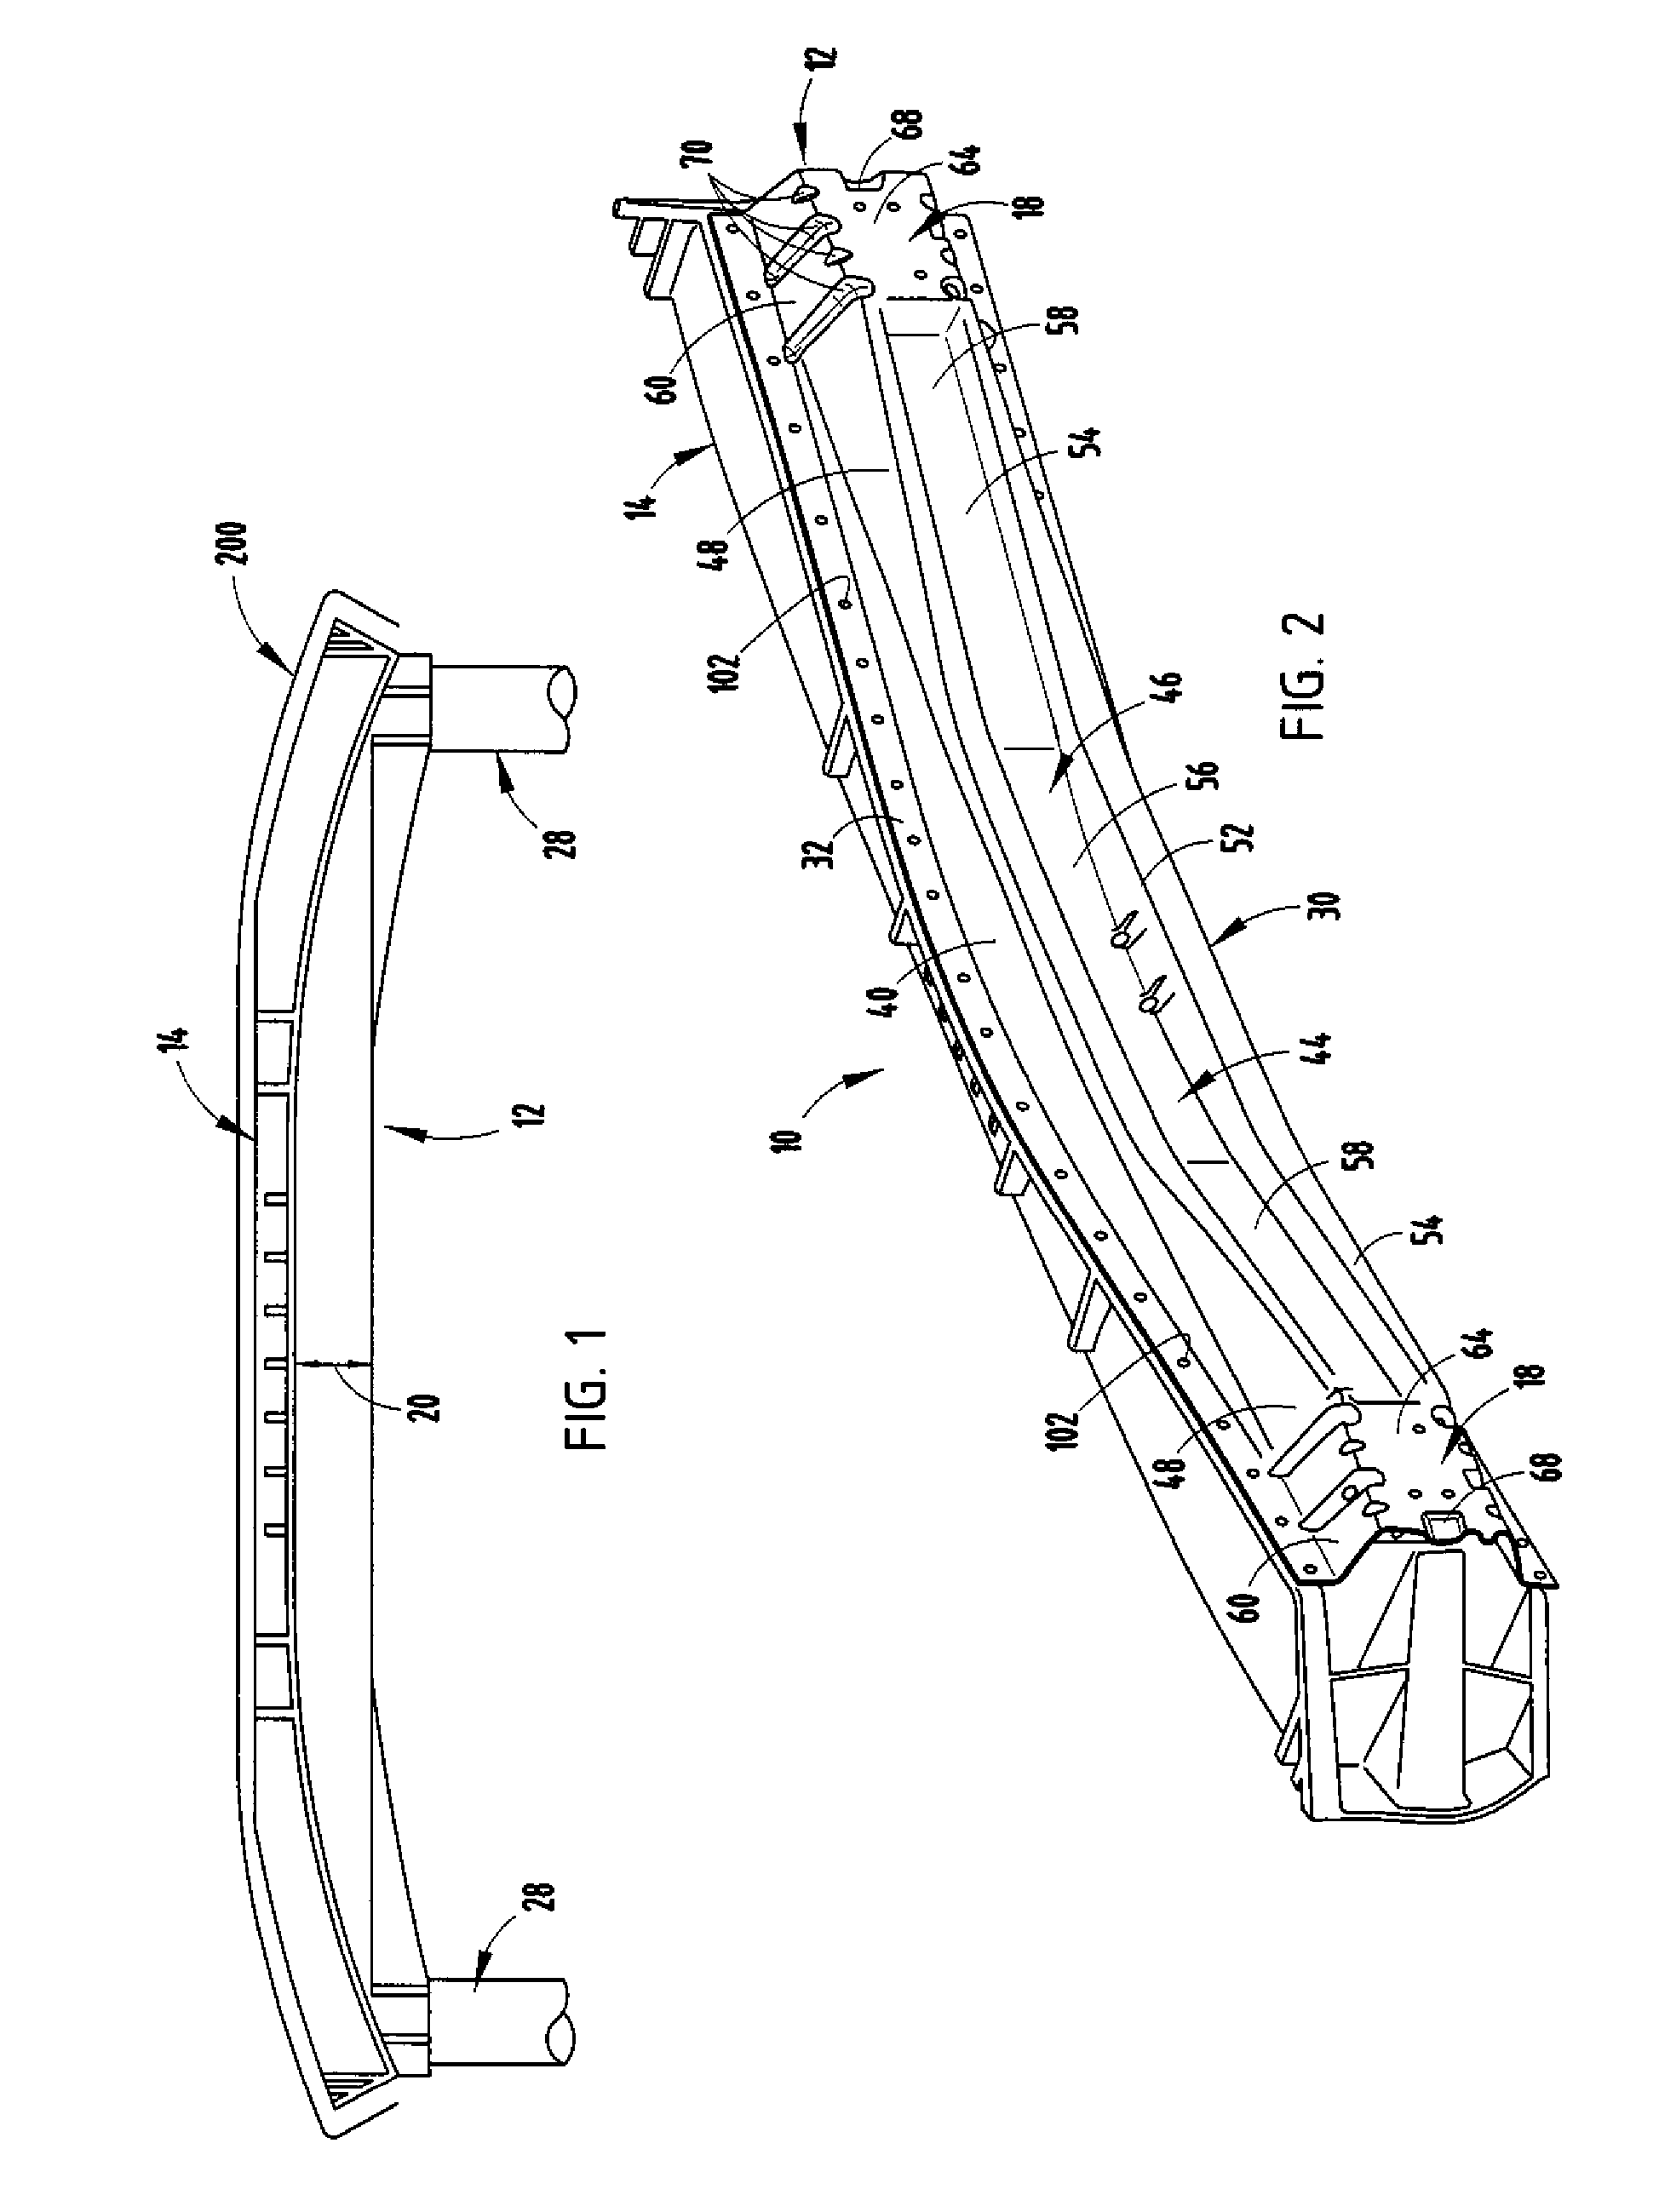 Vehicle bumper beam constructed of metal and plastic